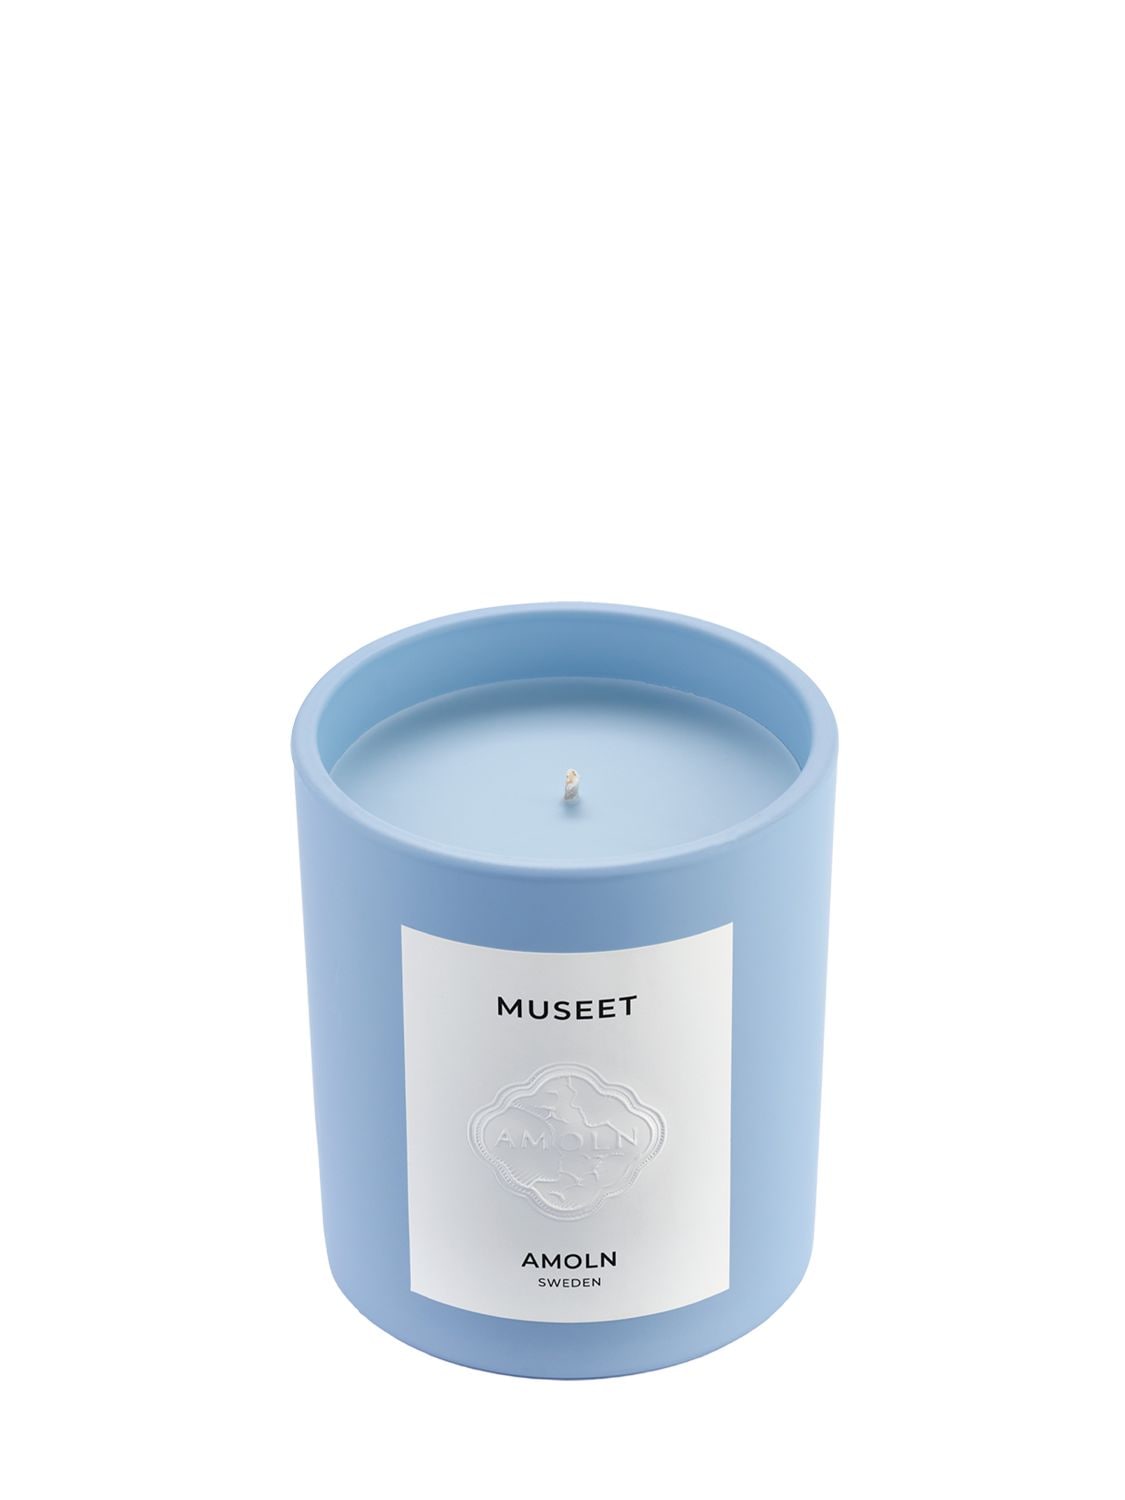 Amoln Museet Scented Candle In Blue